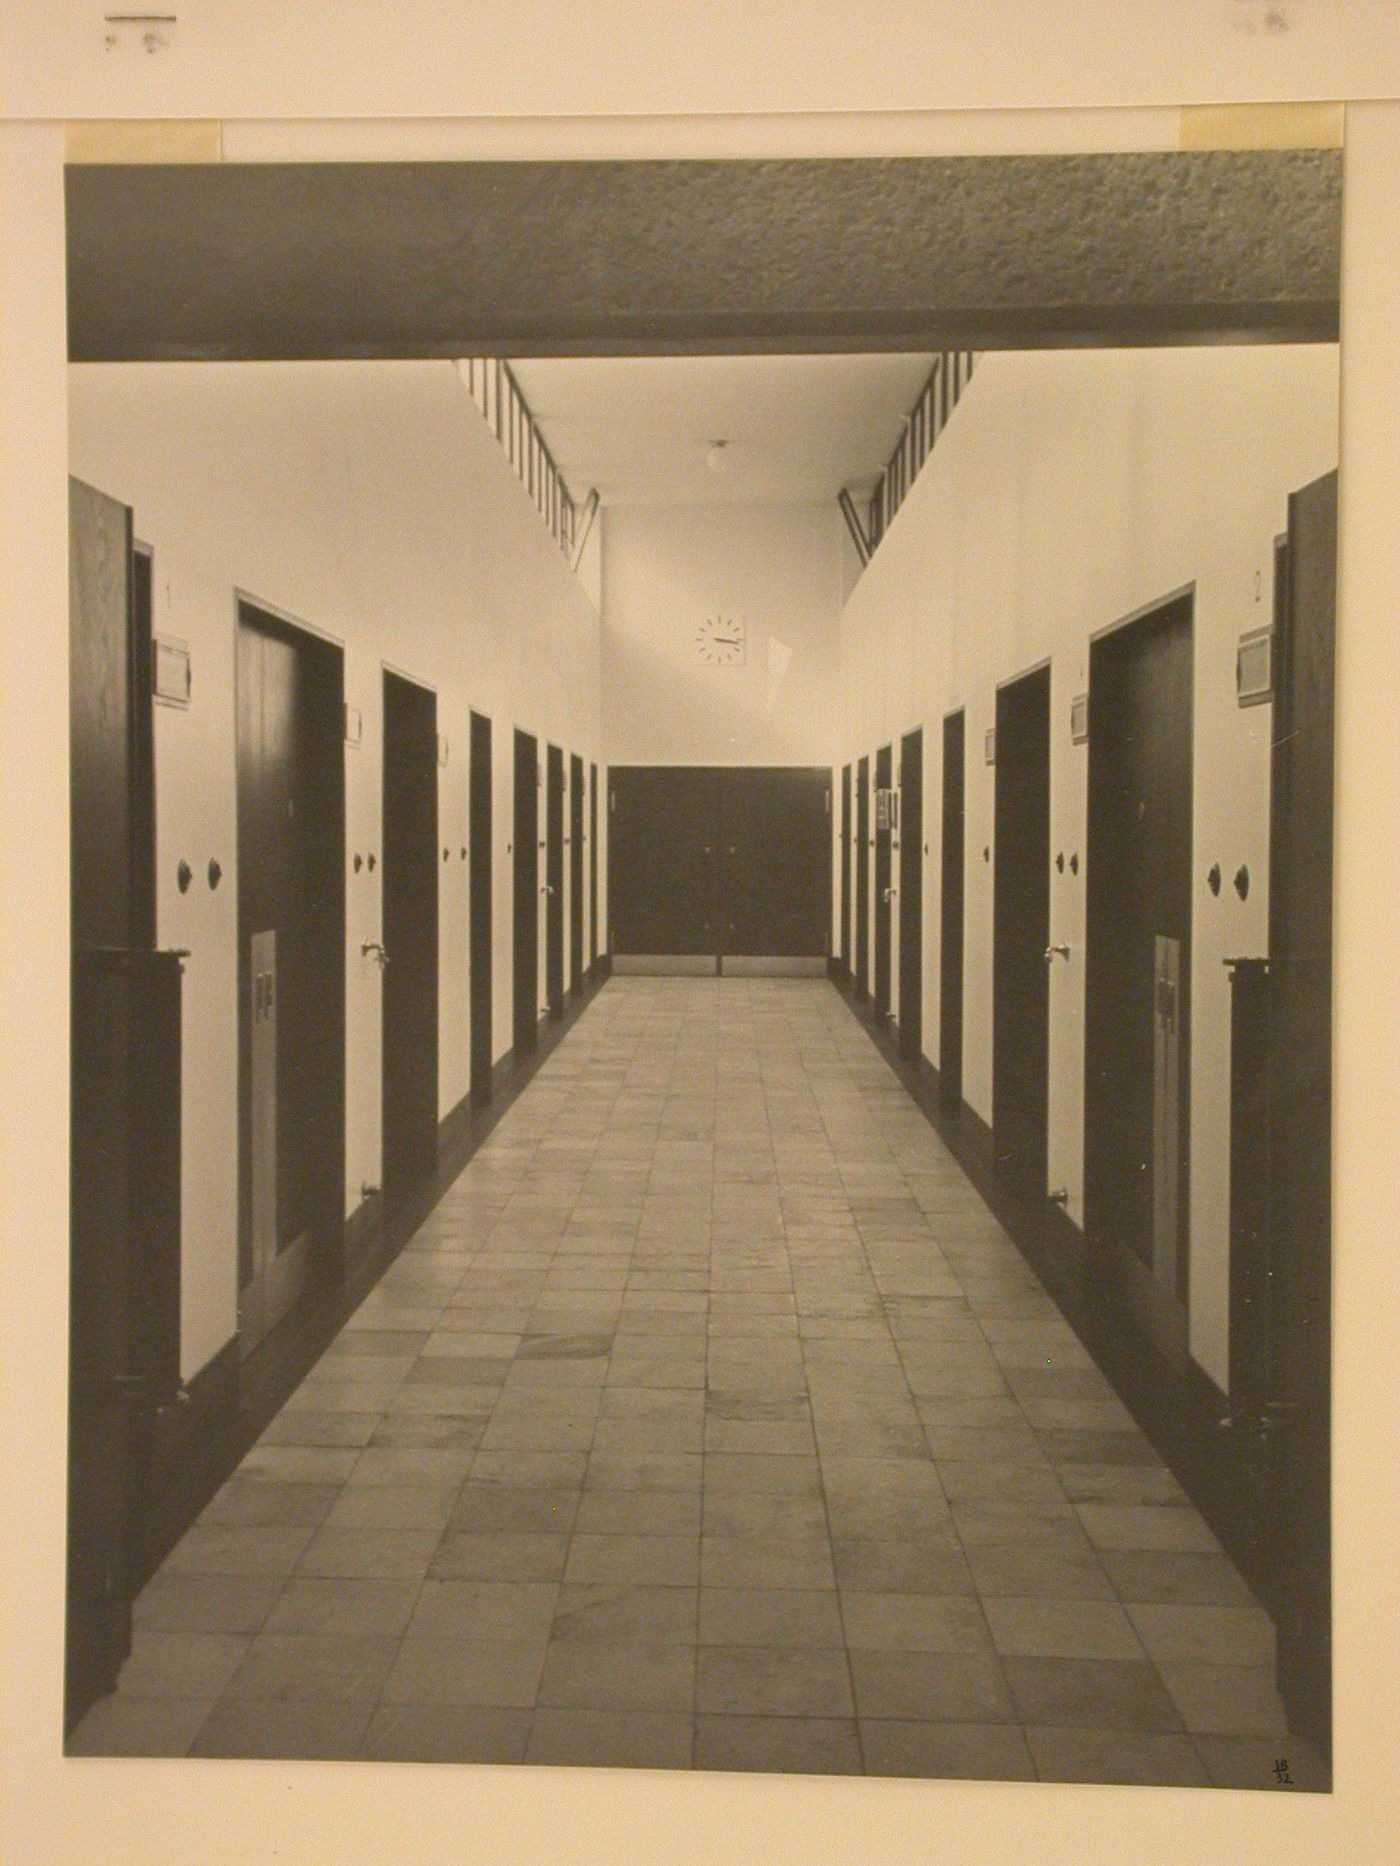 Interior view of a corridor and doors in a building in the New Jewish Cemetery [Neuer Jüdischer Friedhof], Frankfurt am Main, Germany